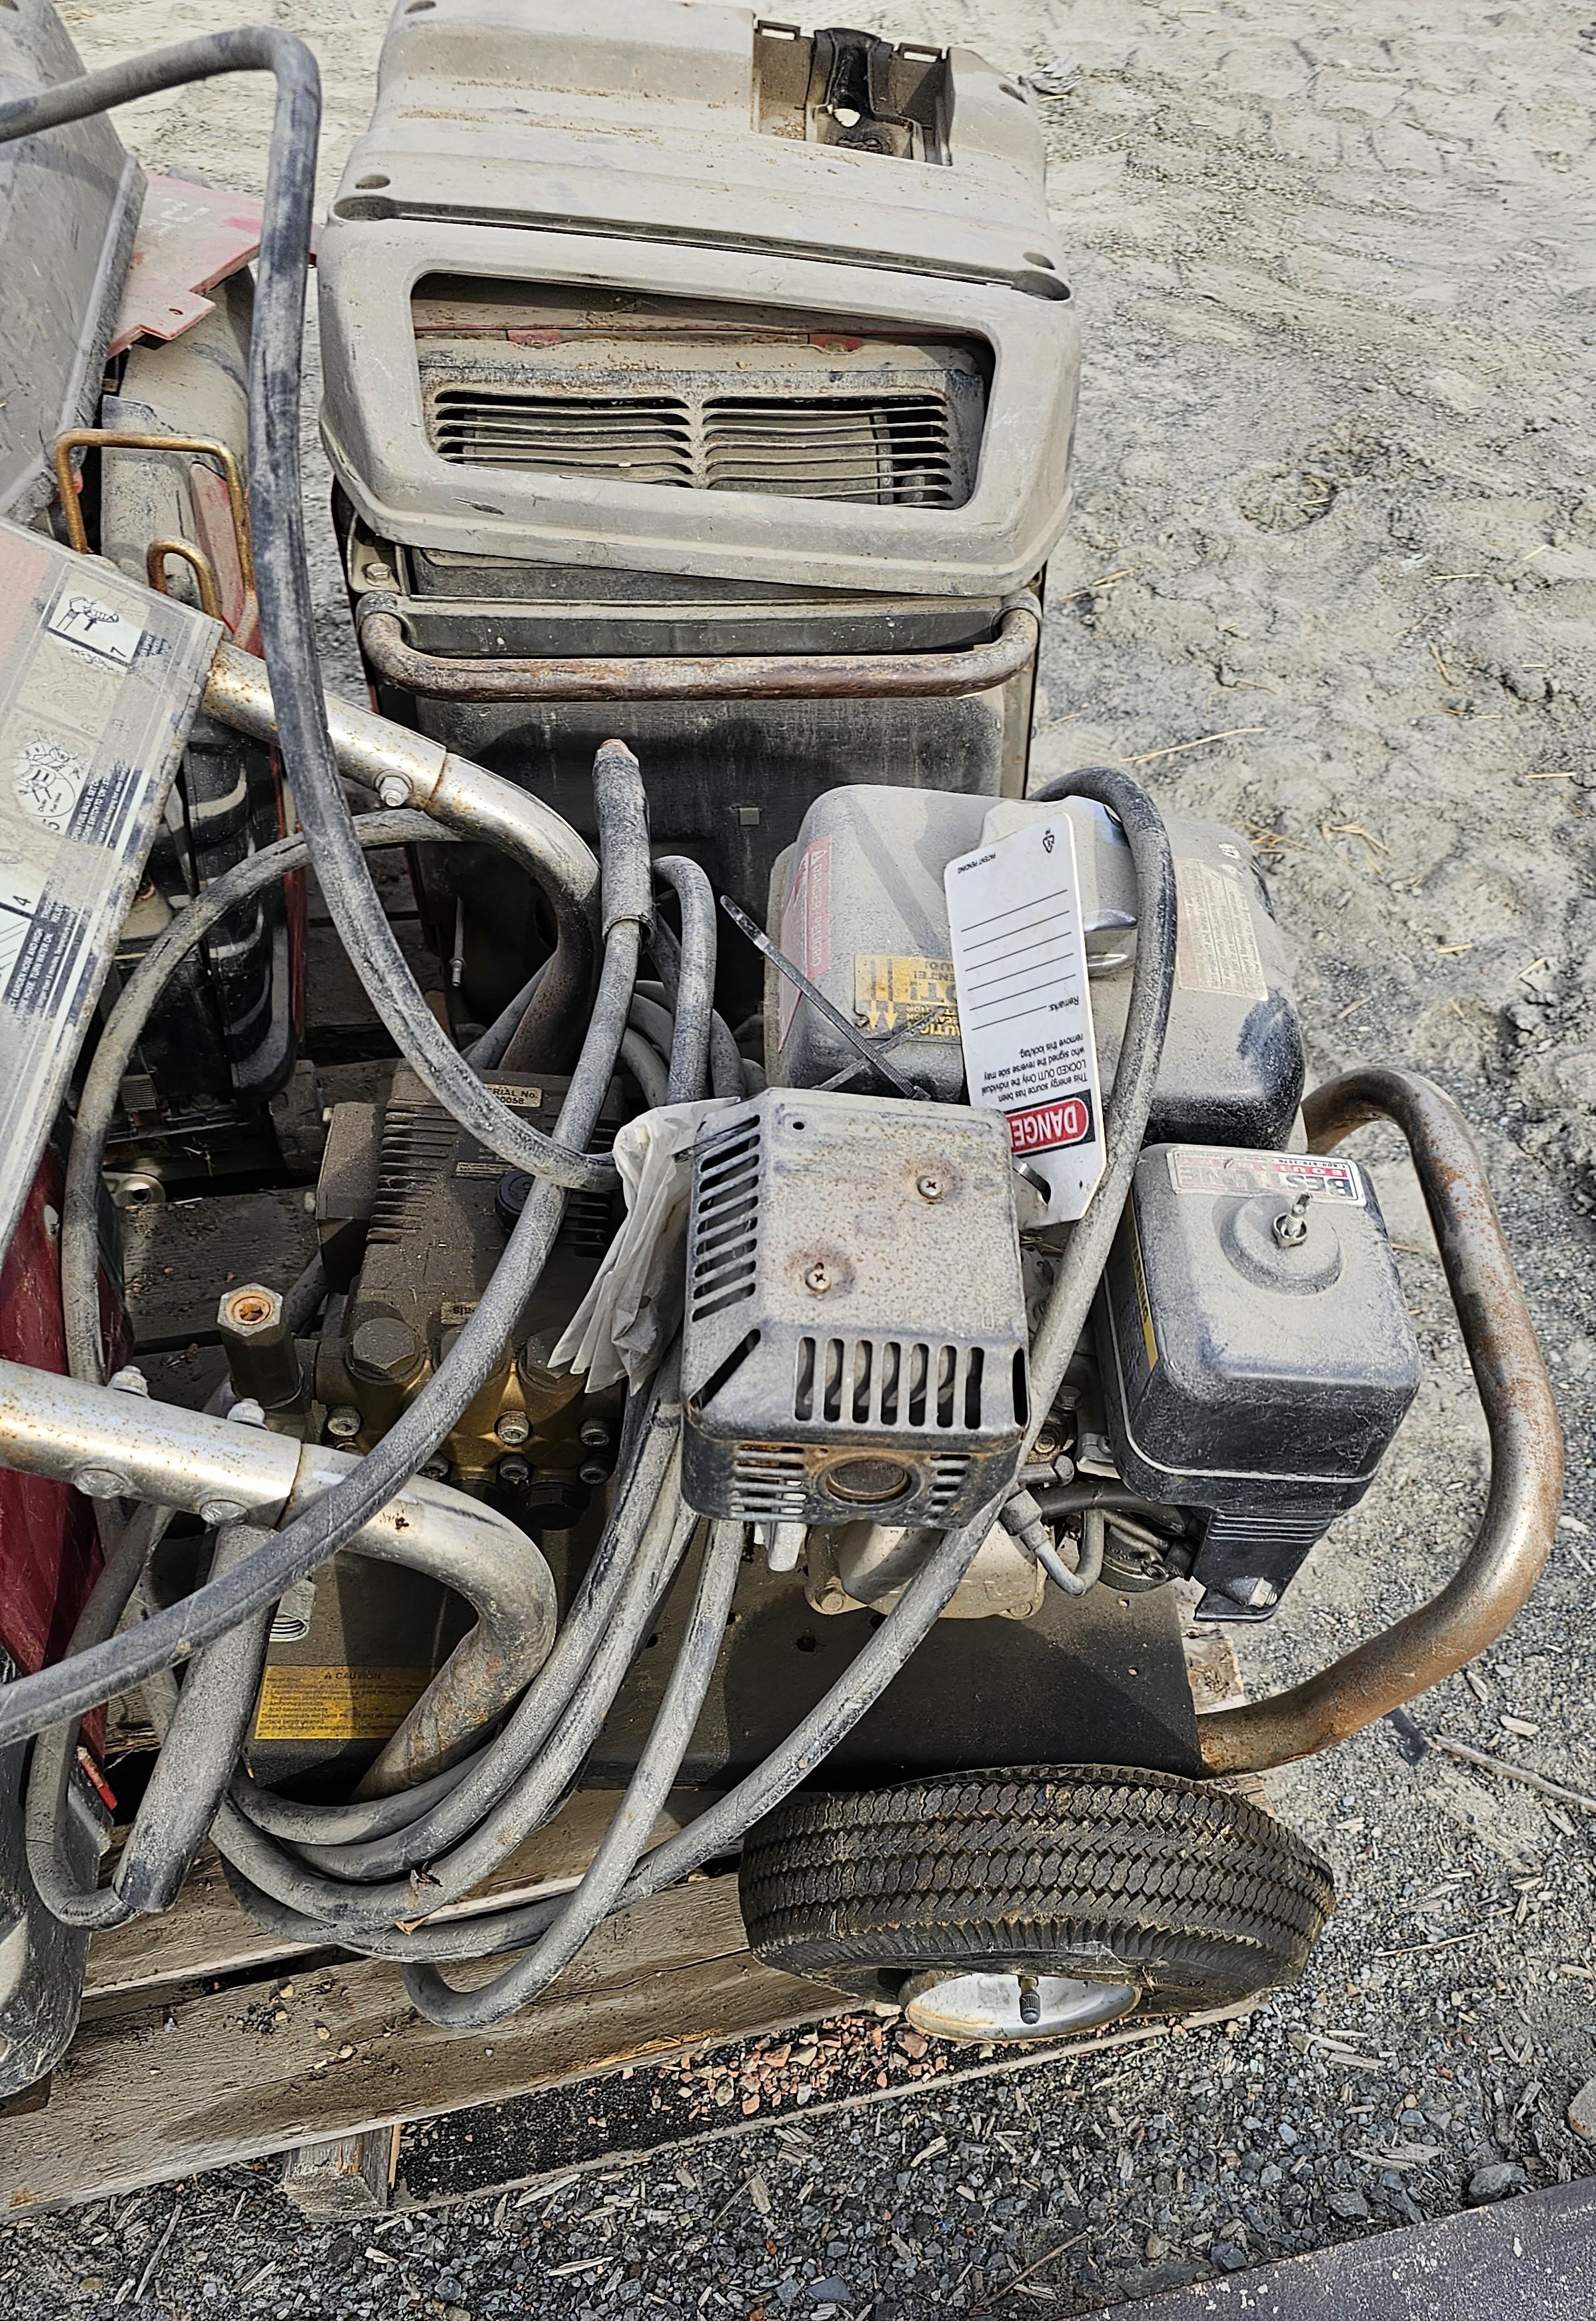 Inverters and Power Washer